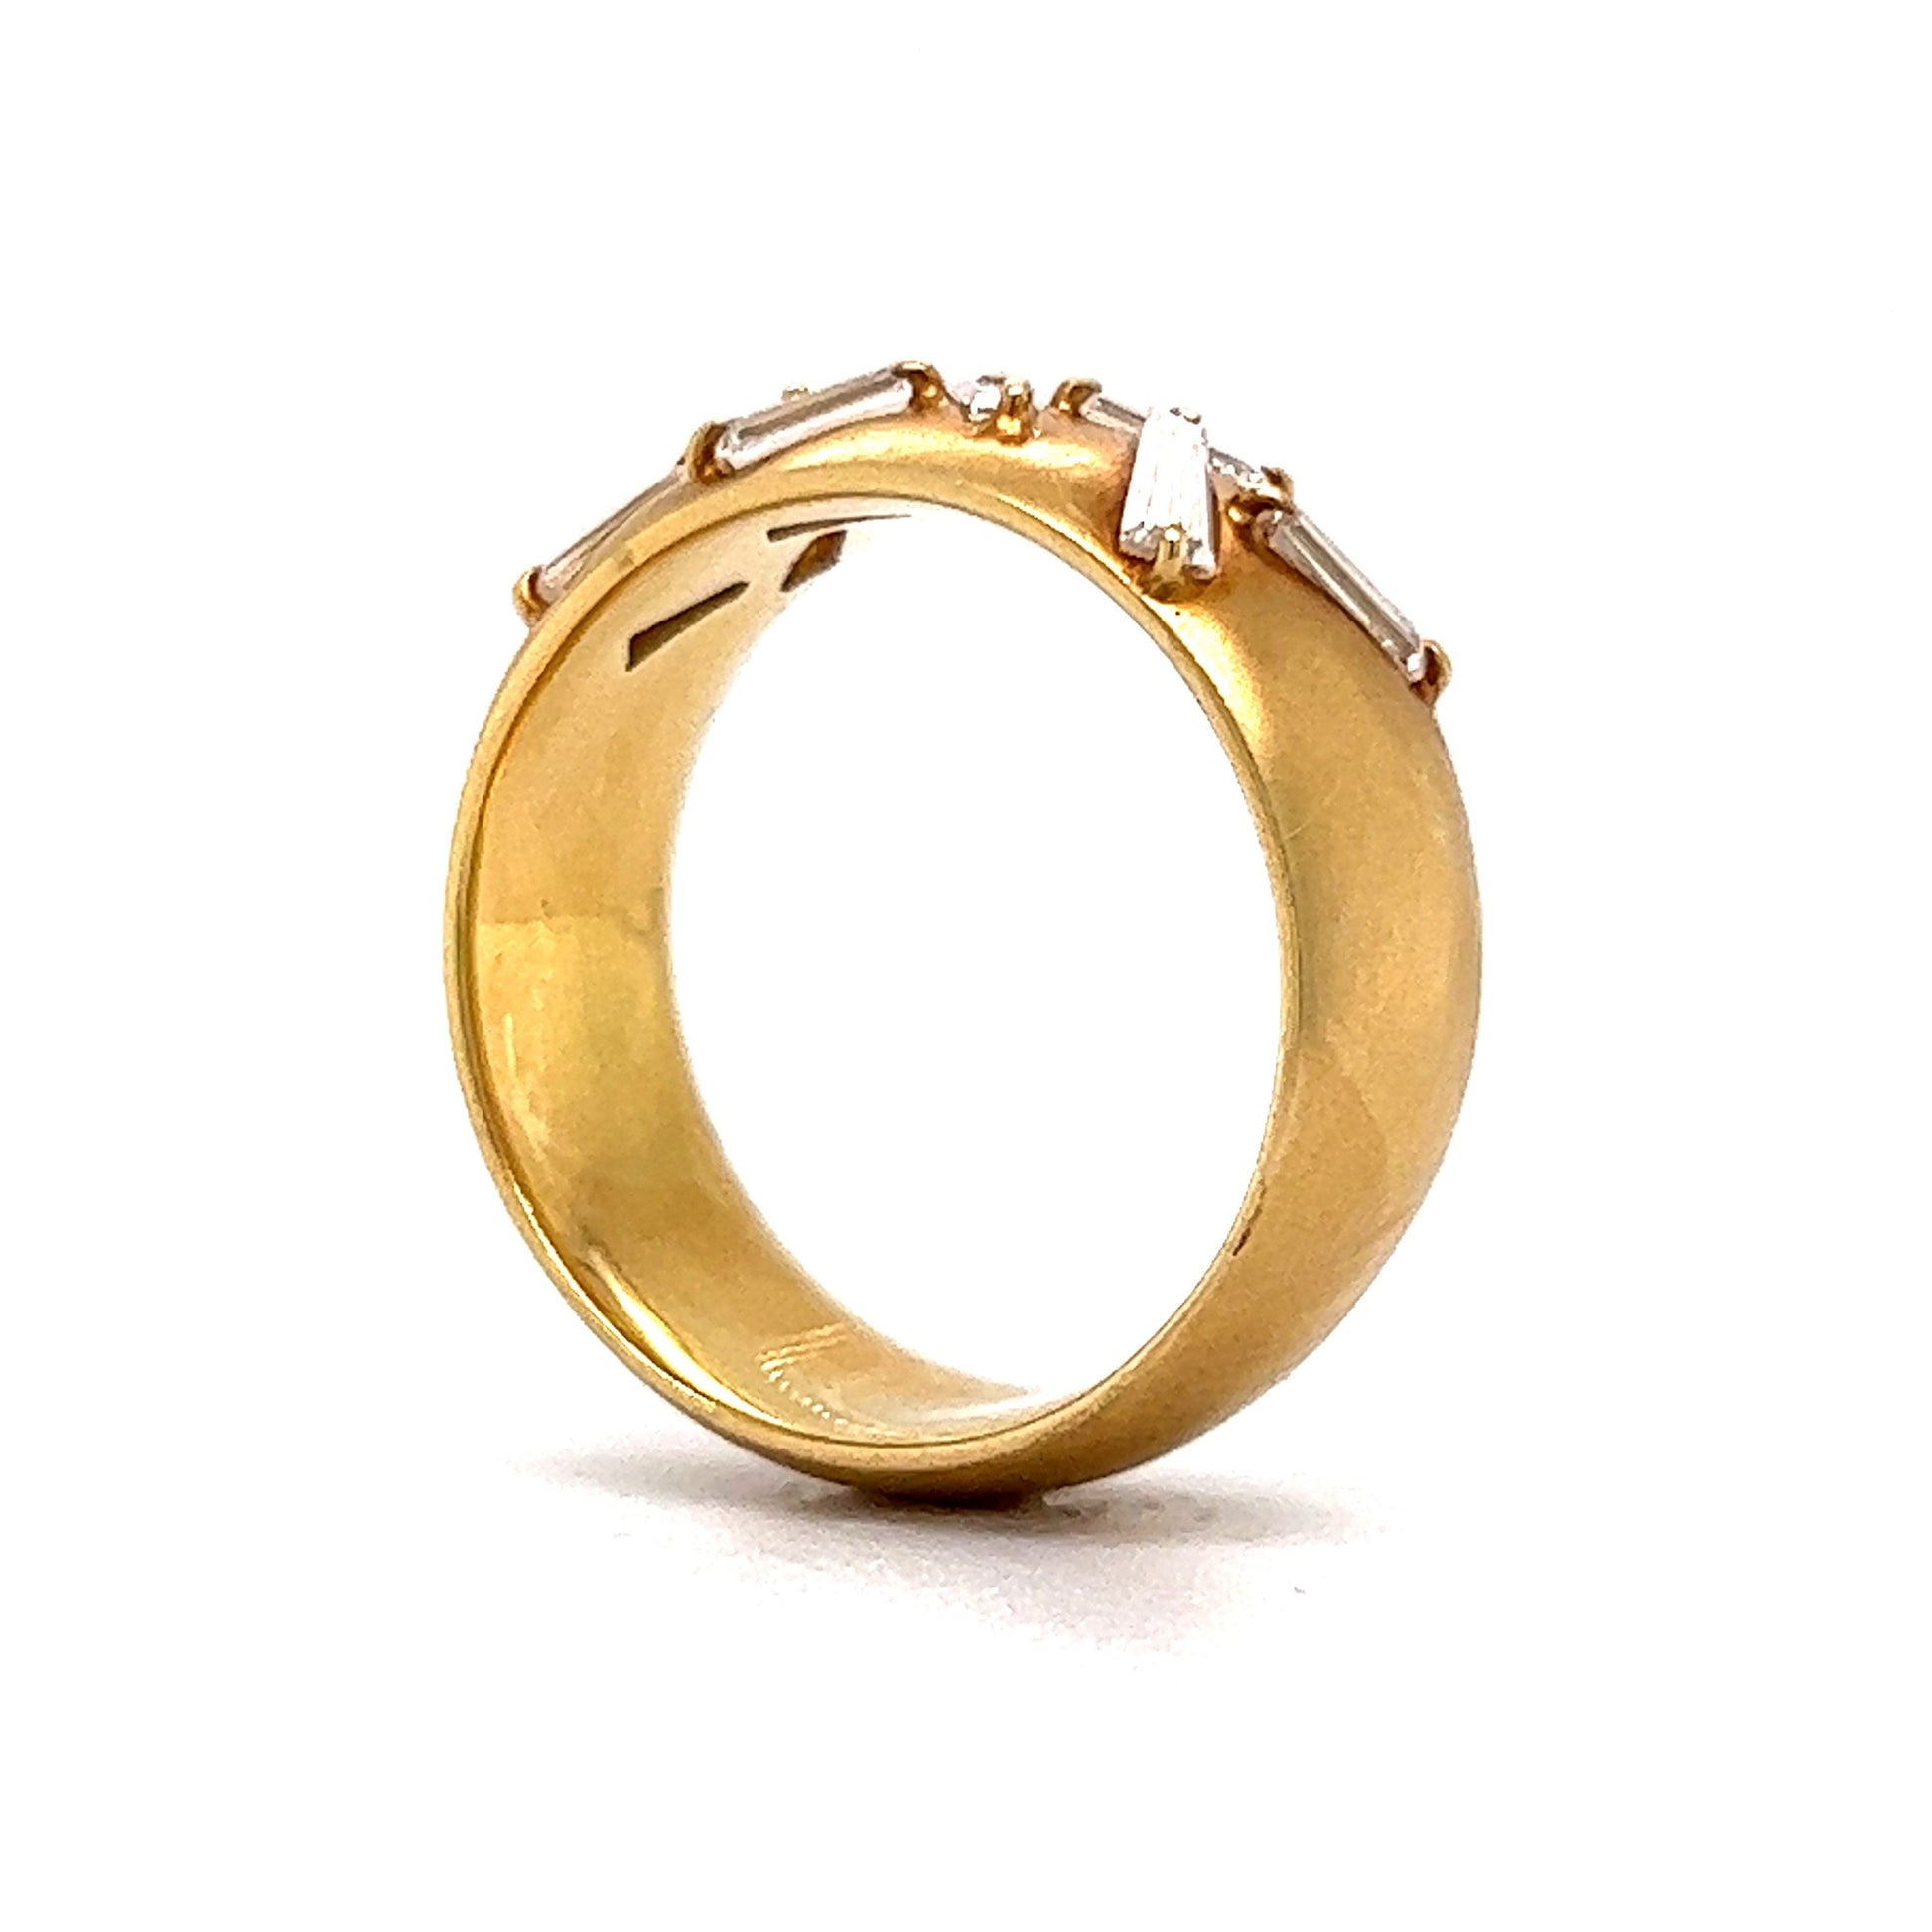 Wide Tapered Baguette Diamond Band in 18k Yellow Gold